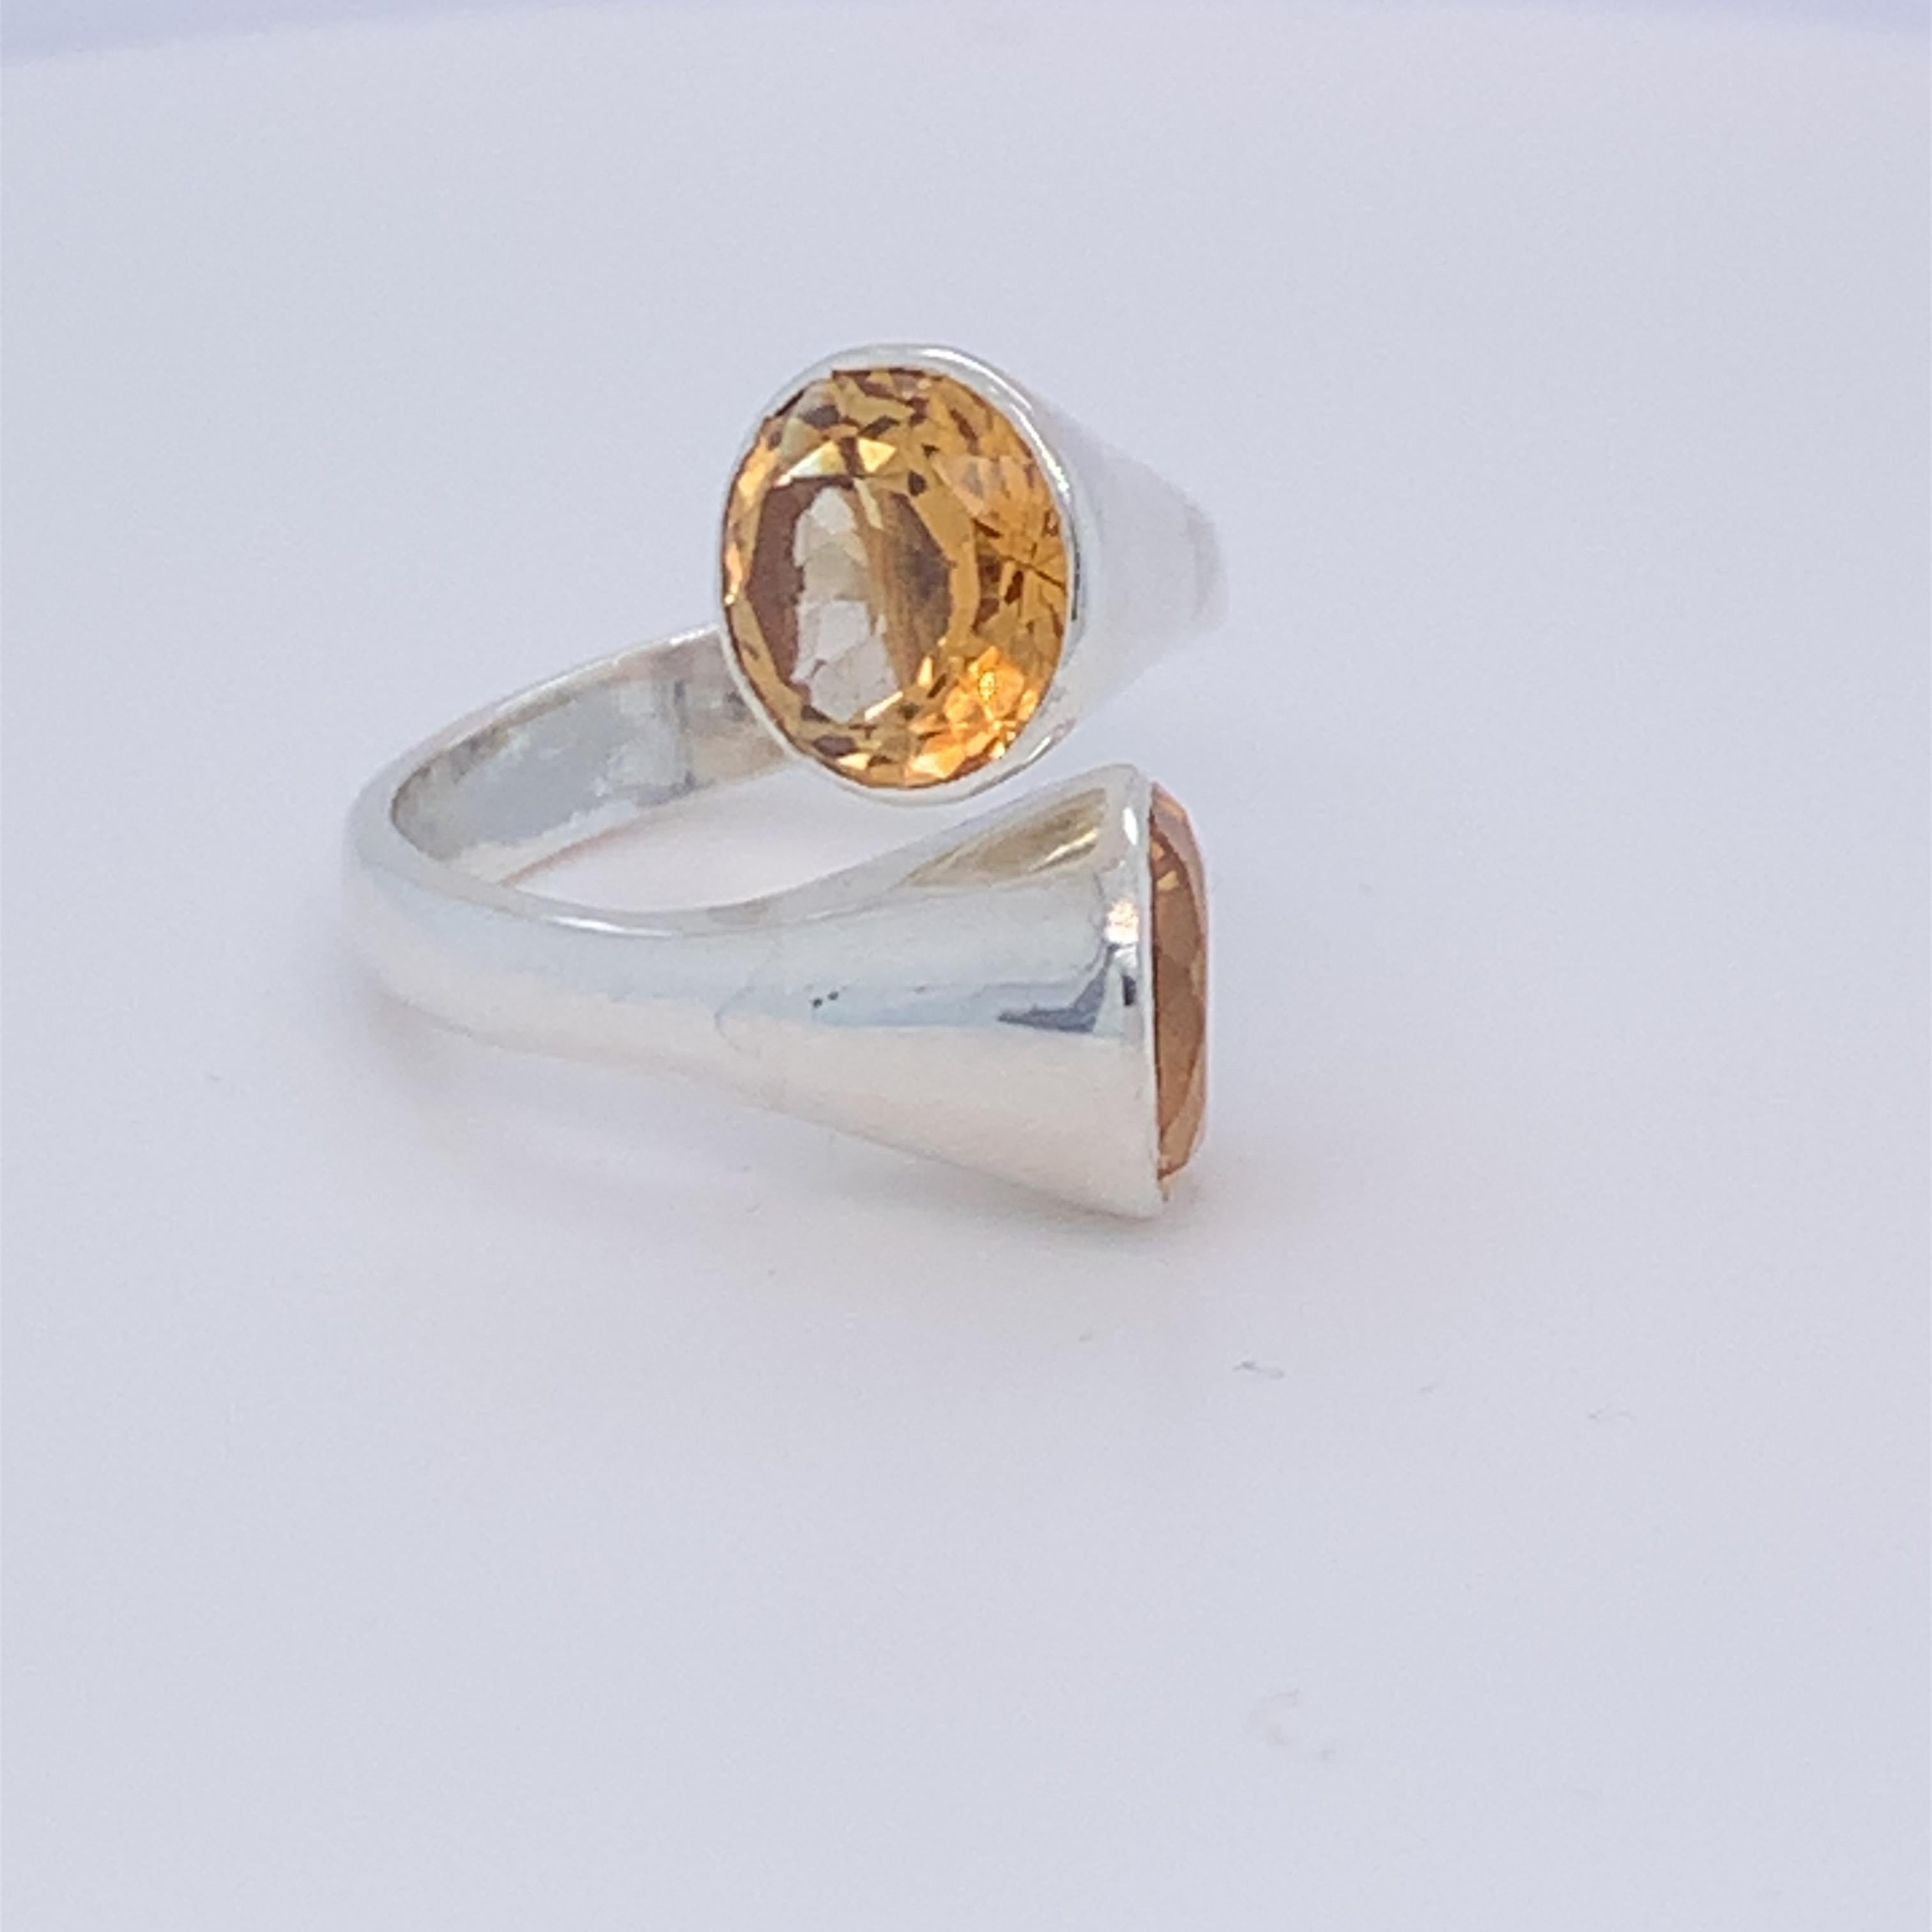 This beautiful tube design two stone ring boasts round citrine. Birthstone of the month of November. Its unique and chic design is suitable for day wear. Set in sterling silver and hand made by master craftsman.

Total weight of stone: 5.00ct